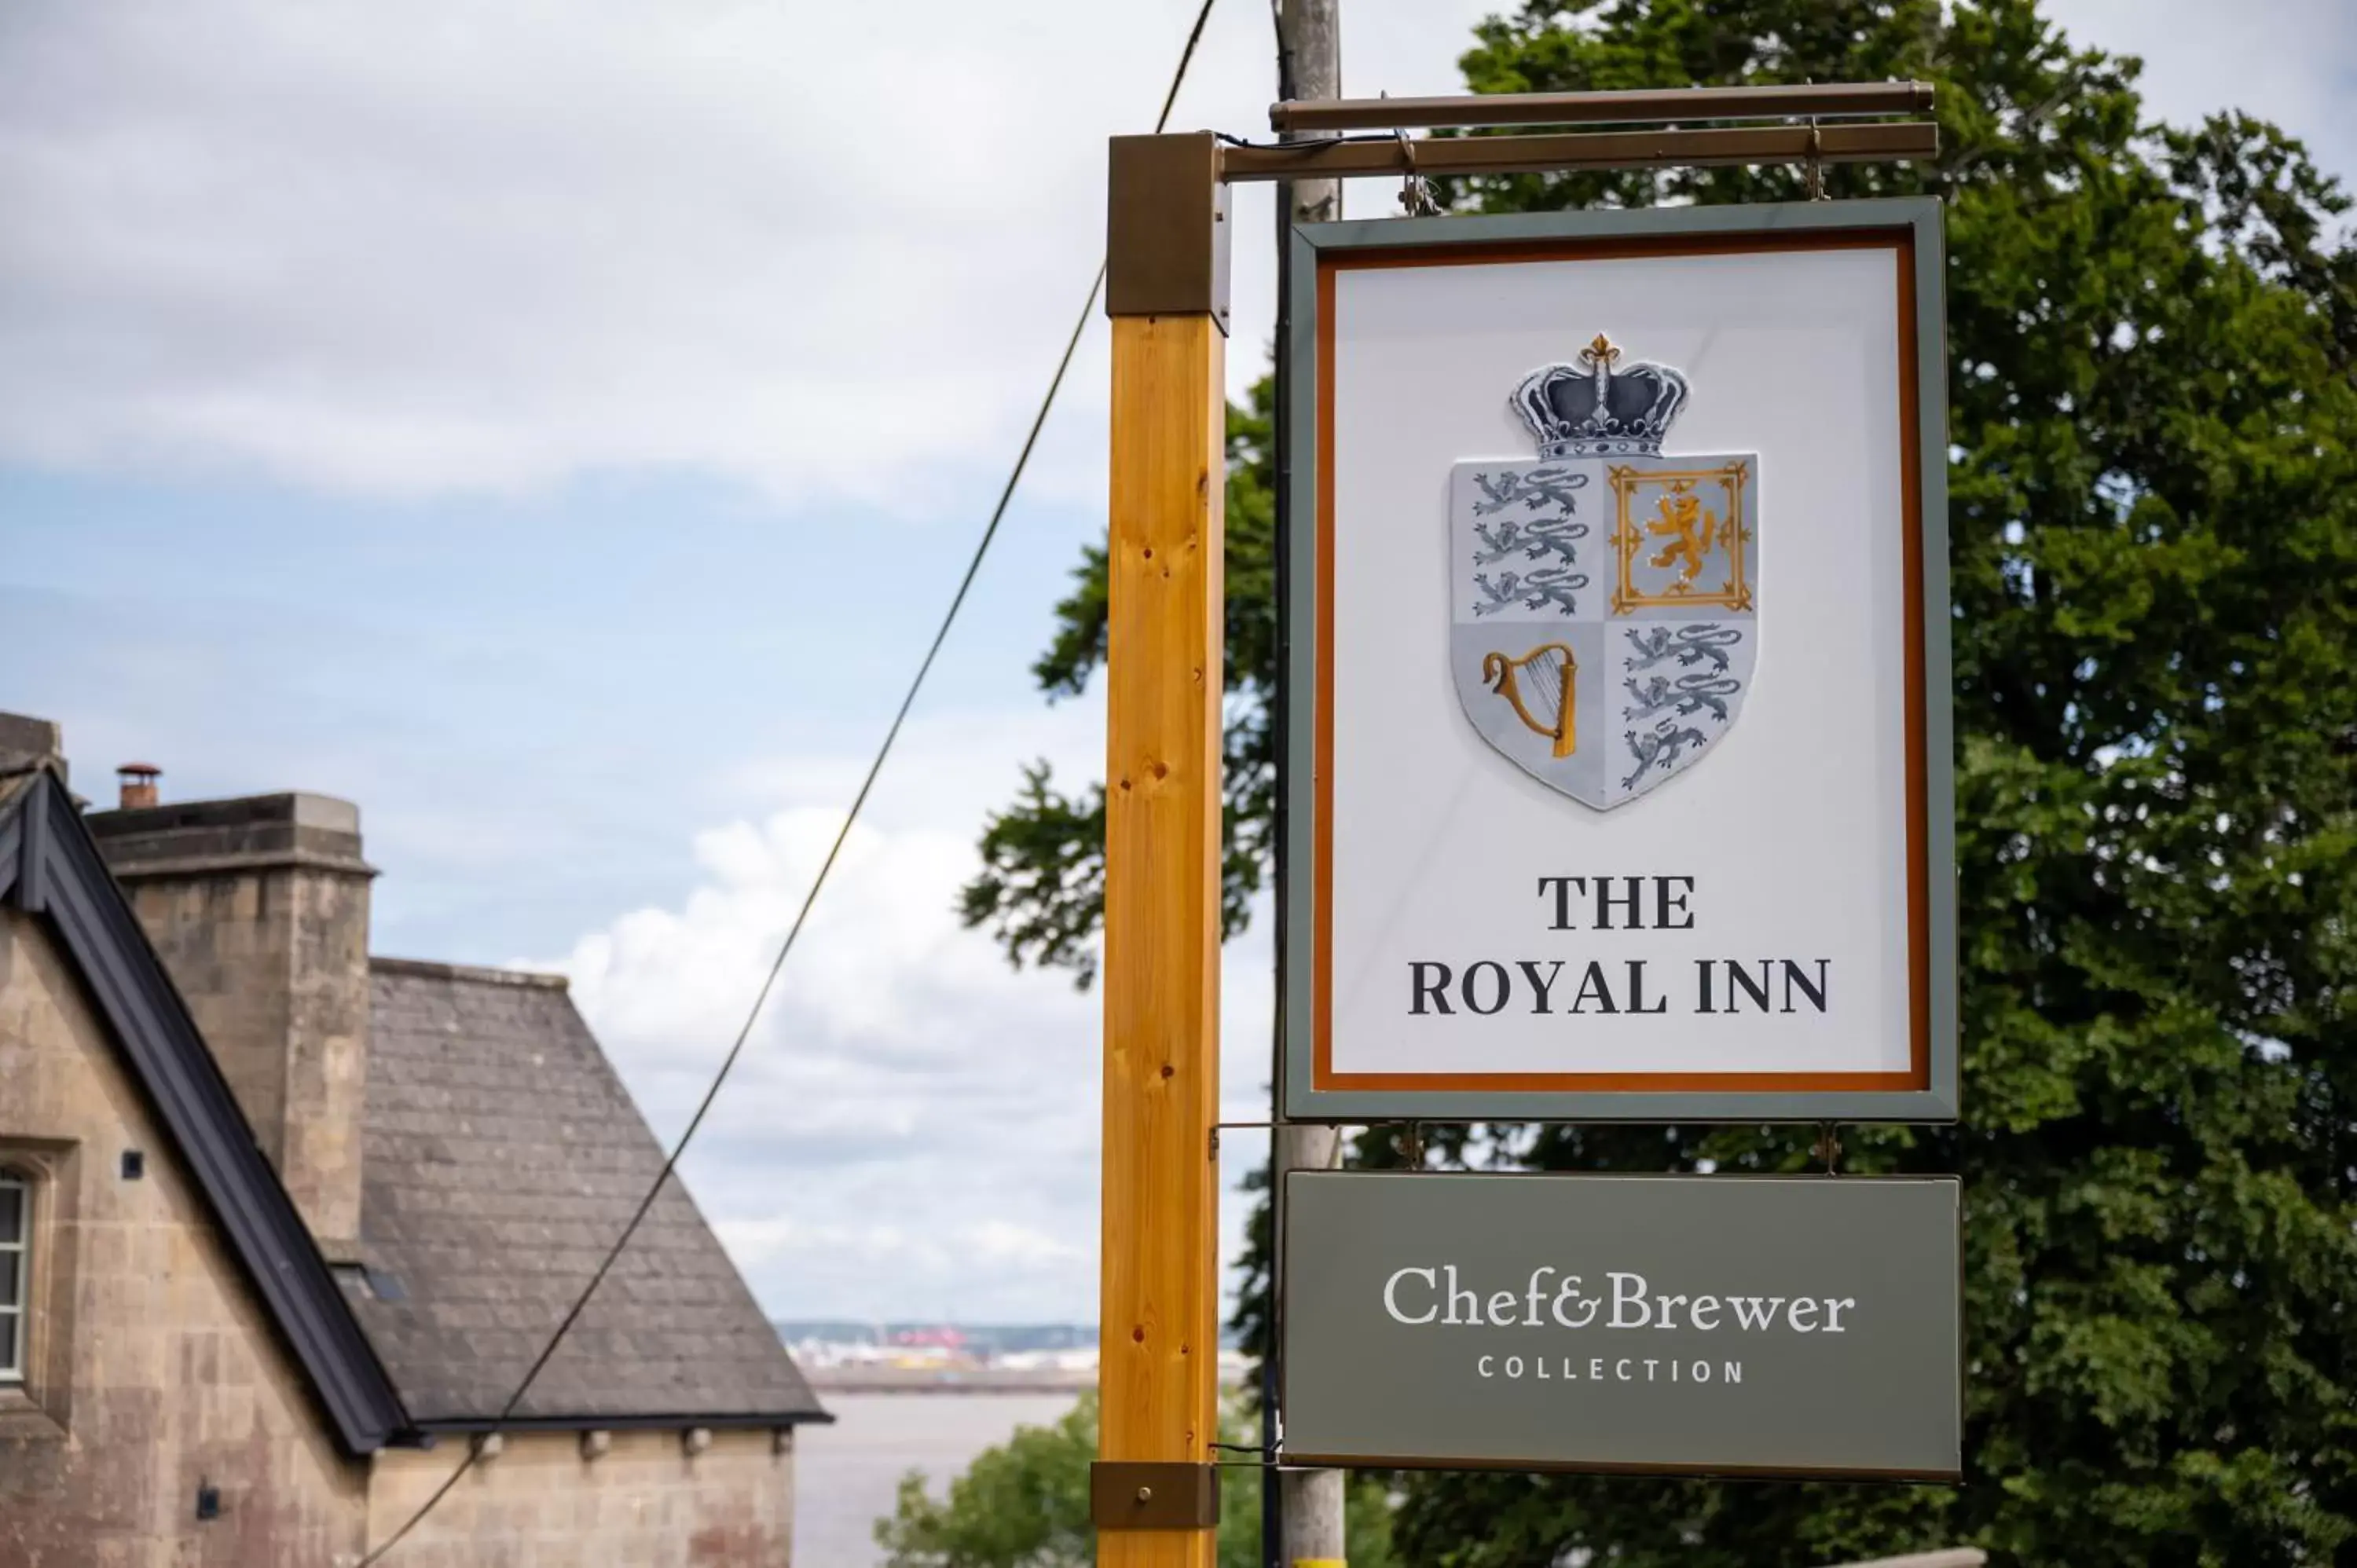 Property Logo/Sign in The Royal Inn by Chef & Brewer Collection